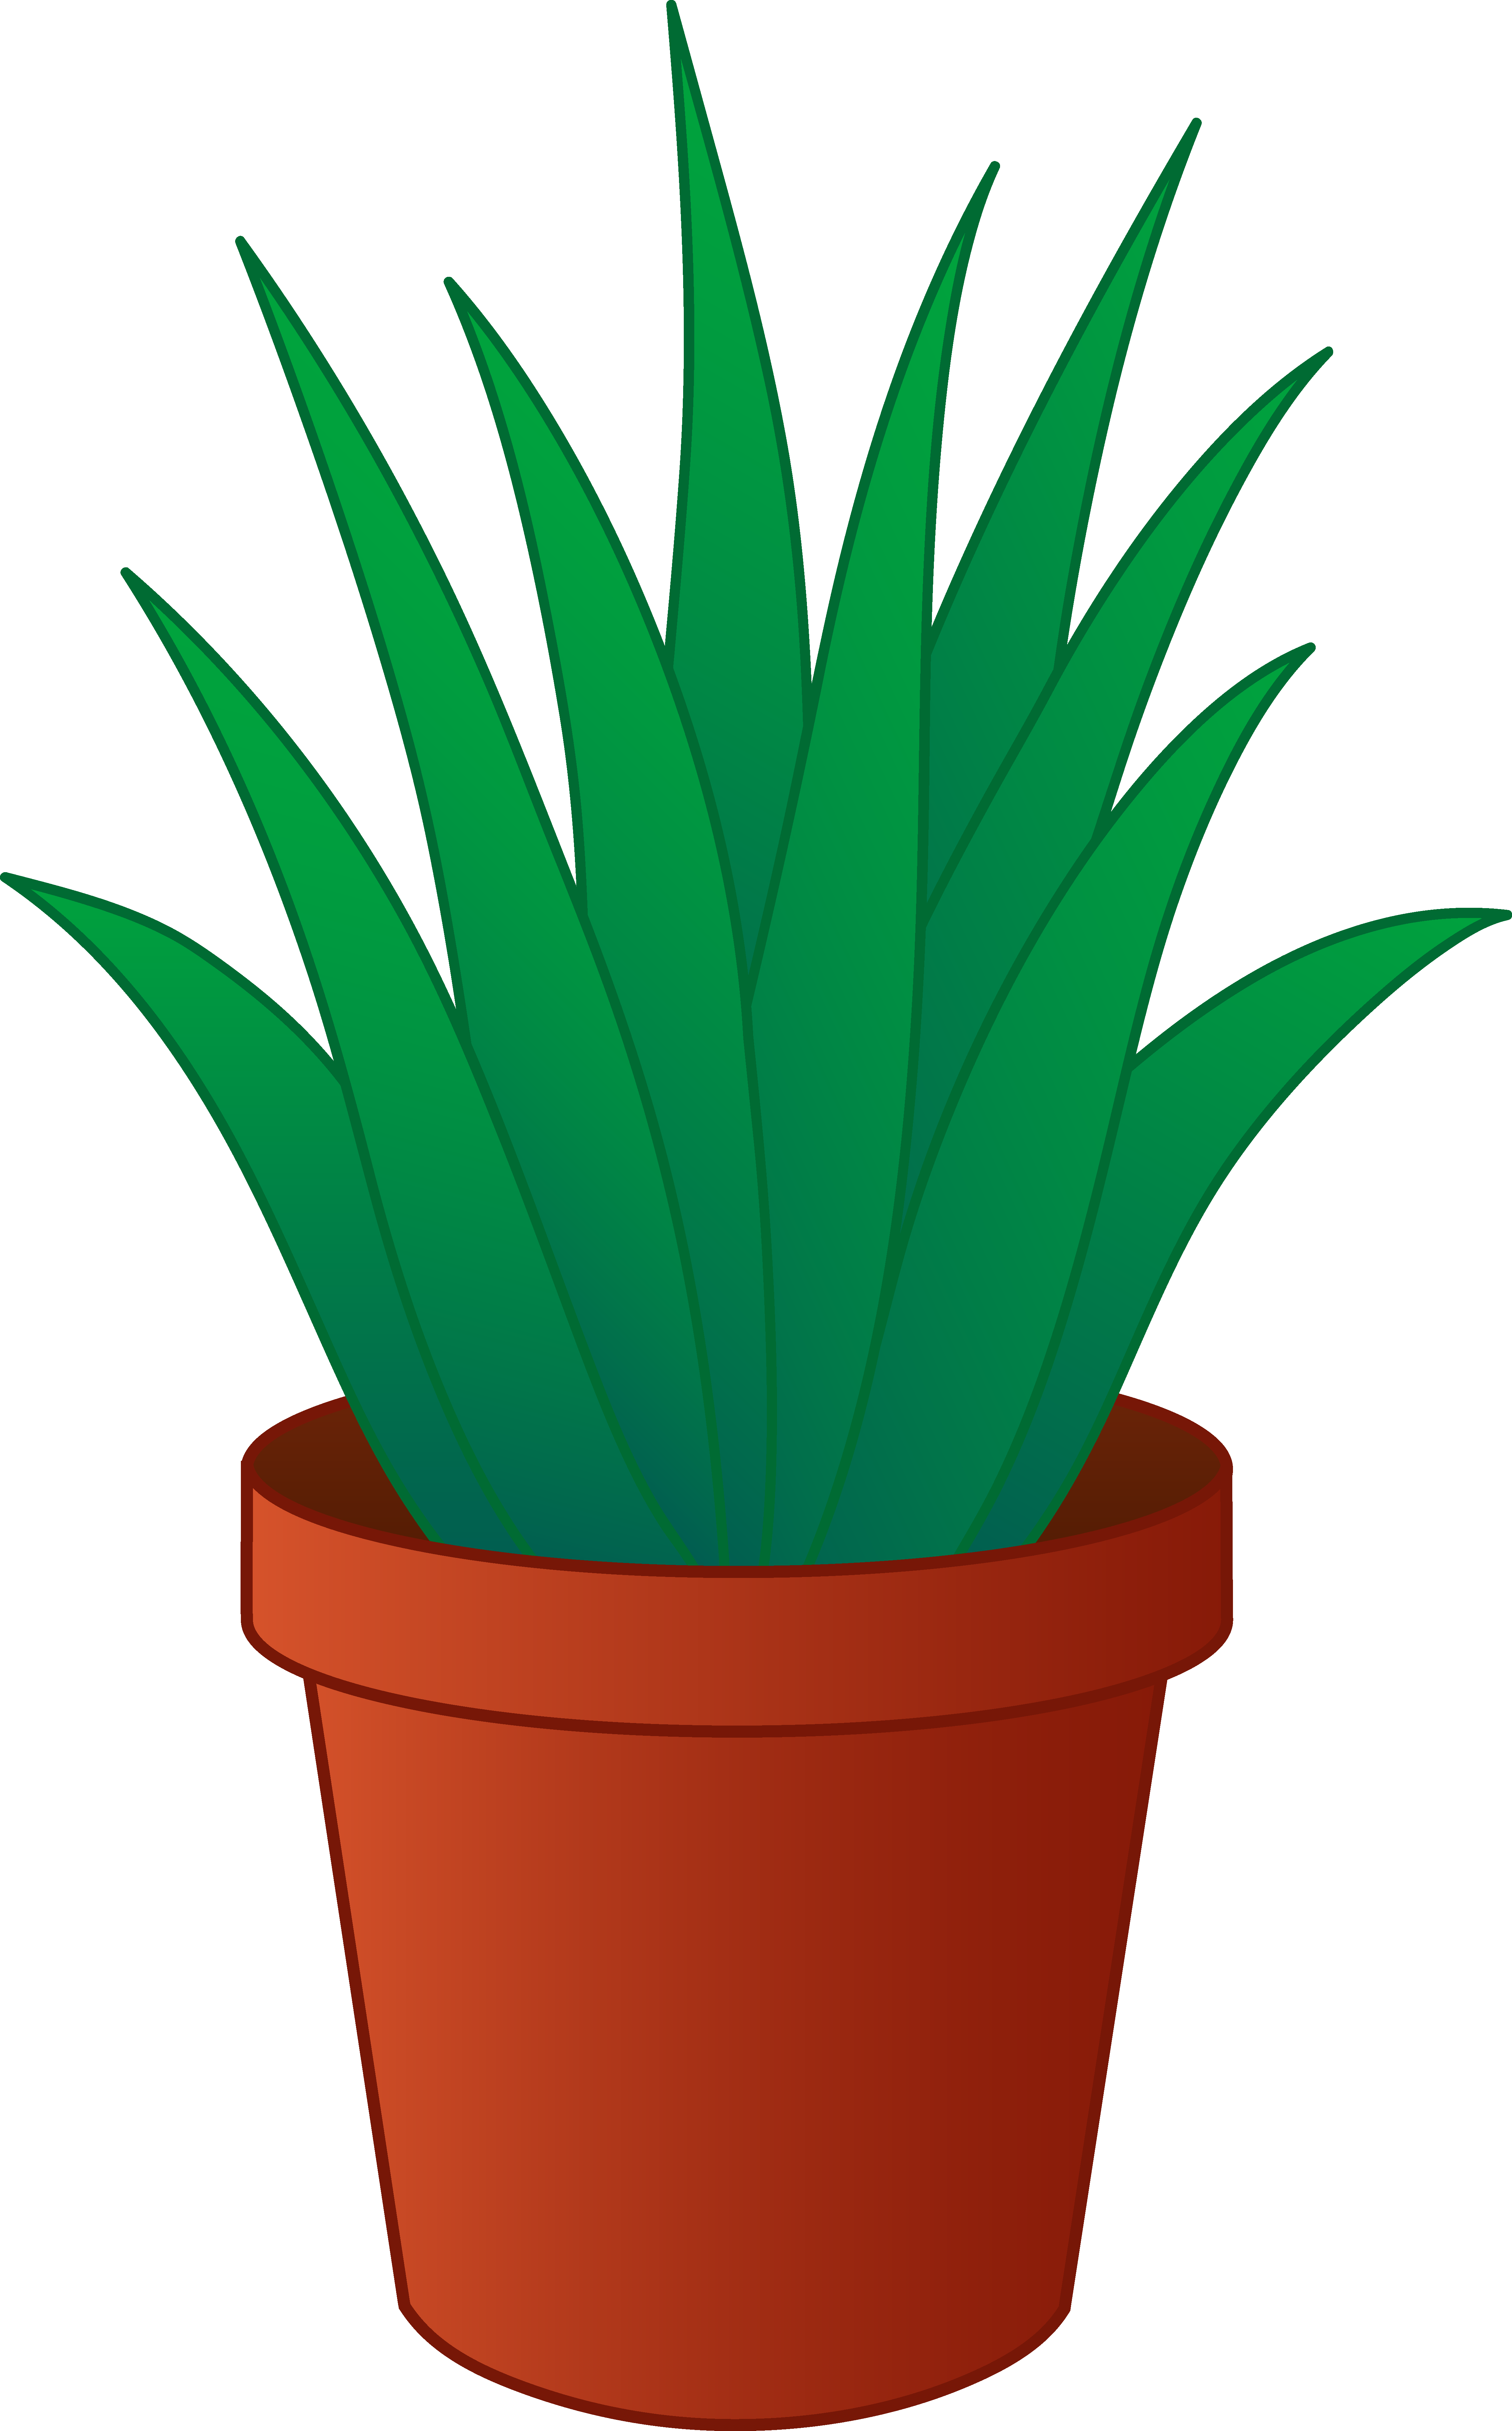 Free Cartoon Plant, Download Free Cartoon Plant png images, Free